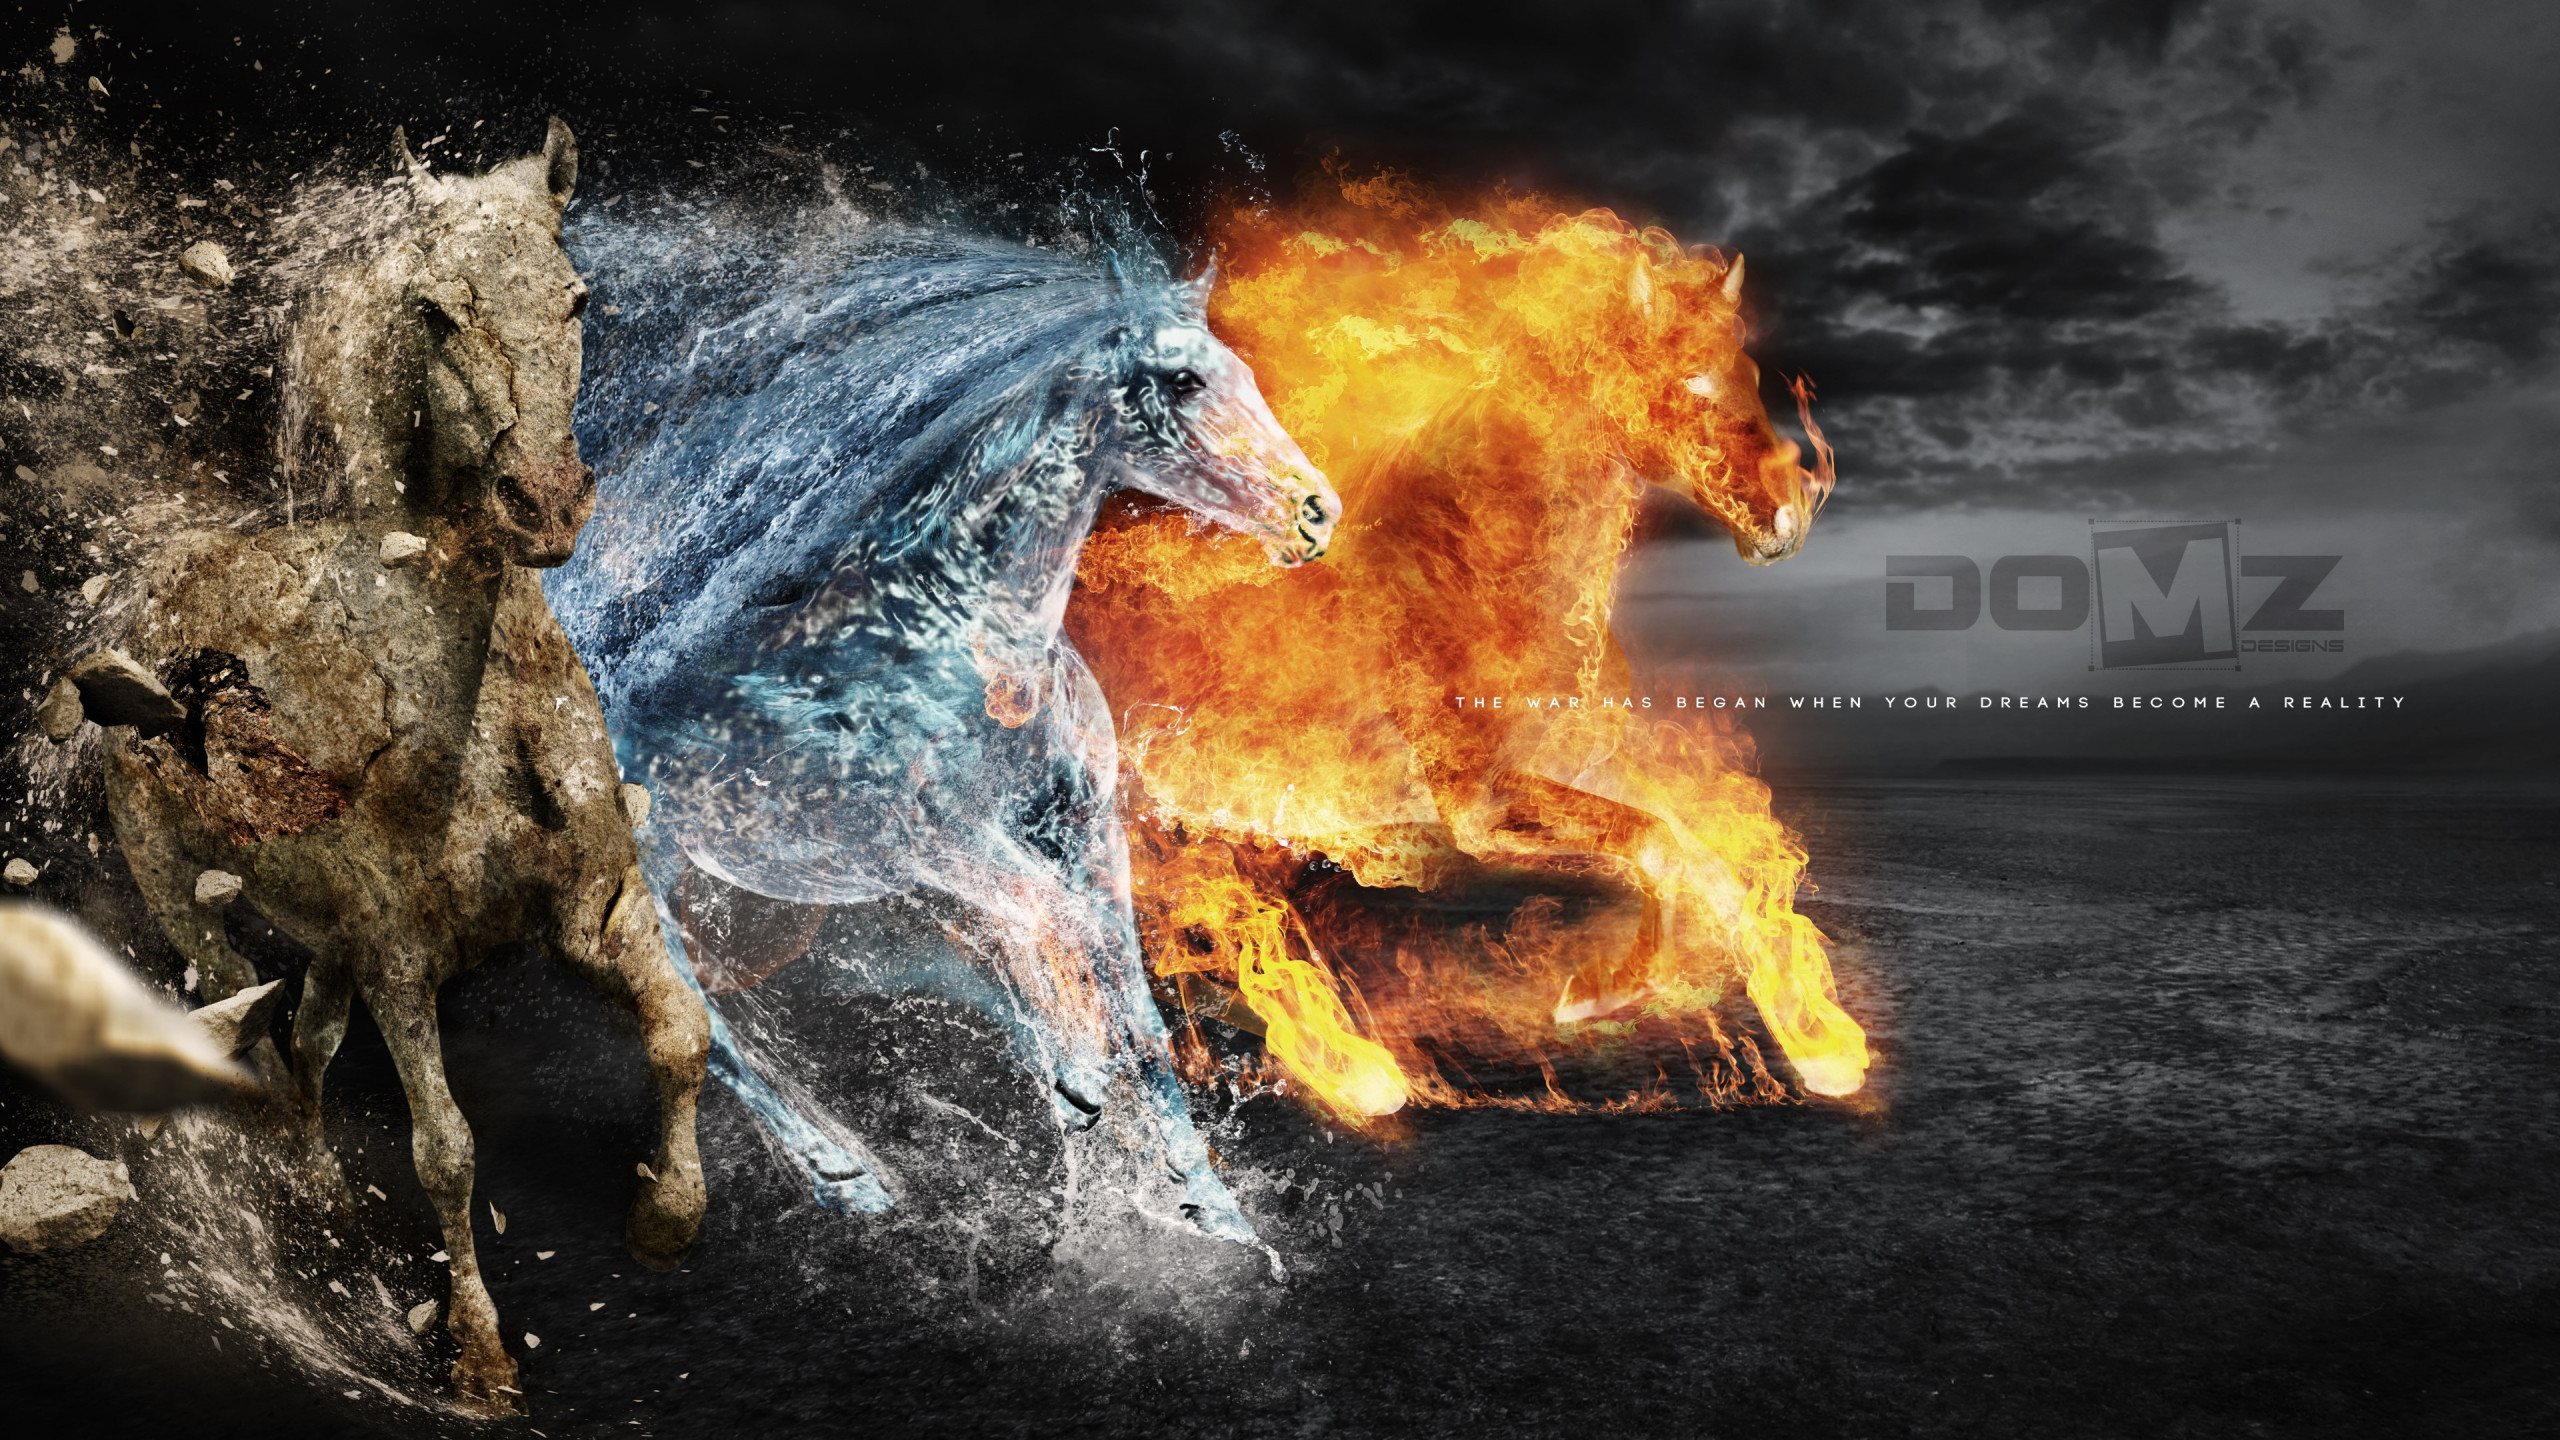 Horses of: Earth, Fire and Water wallpaper 2560x1440